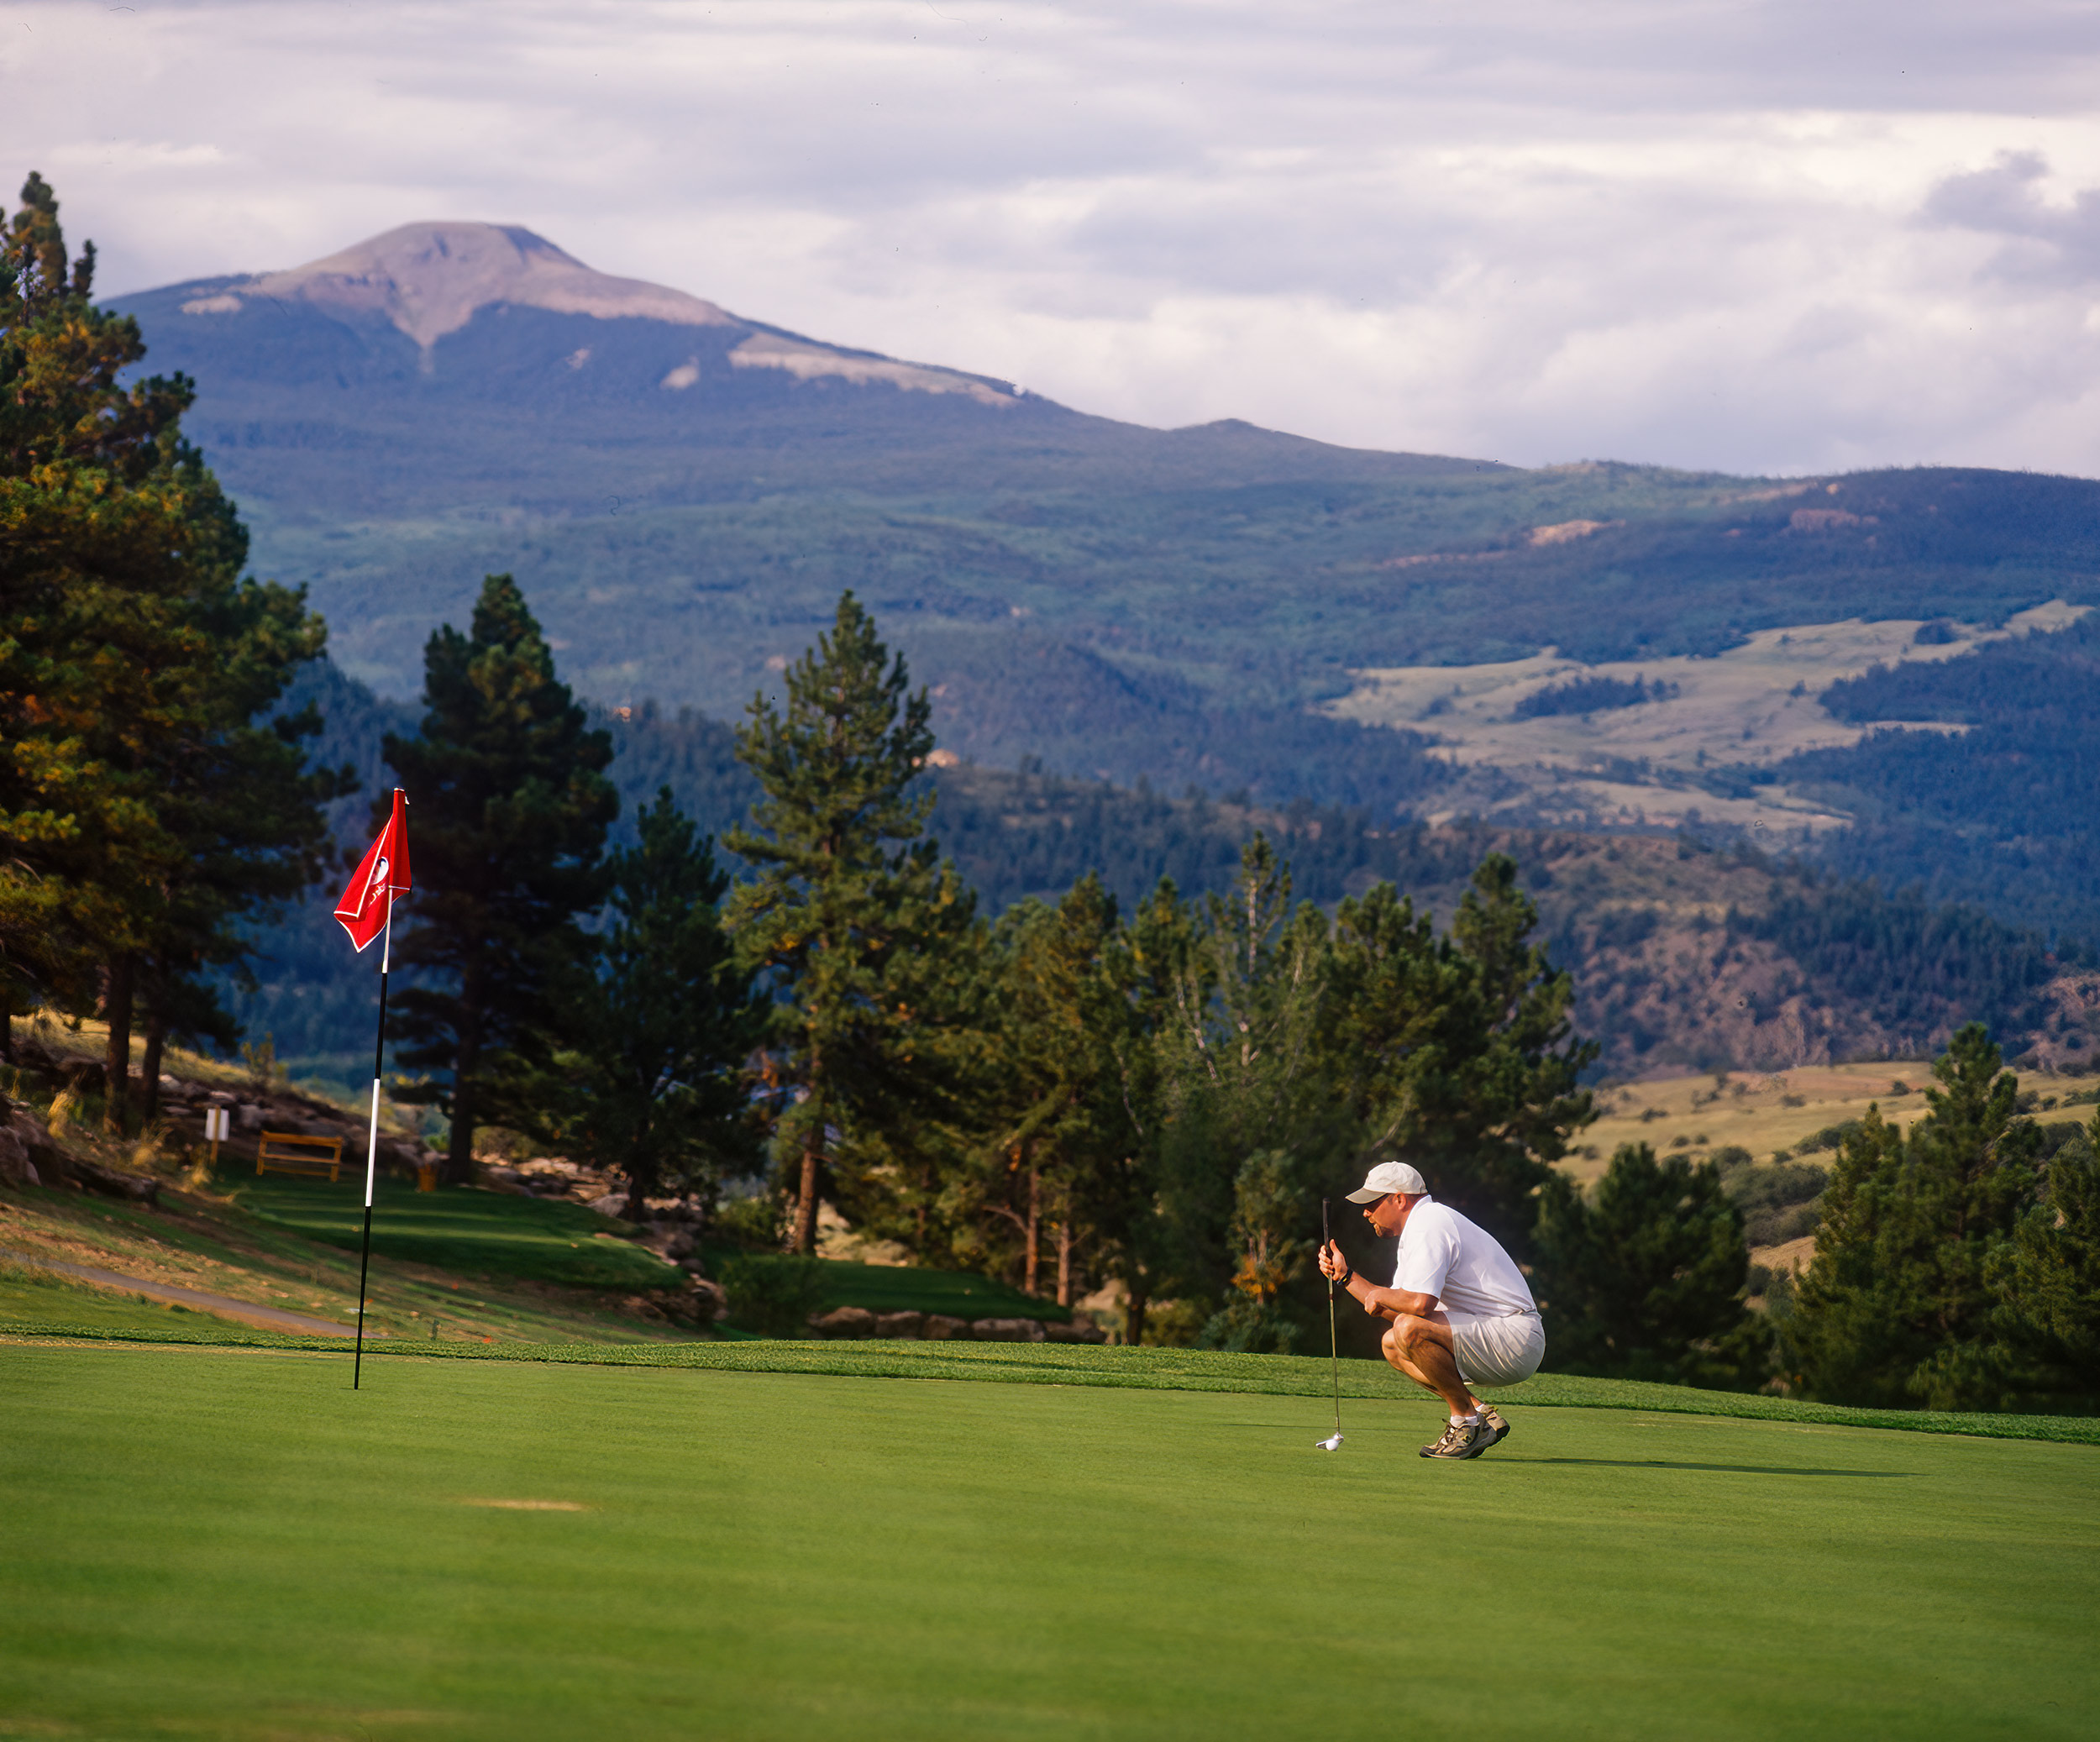 Golfer putting on golf course in mountains.